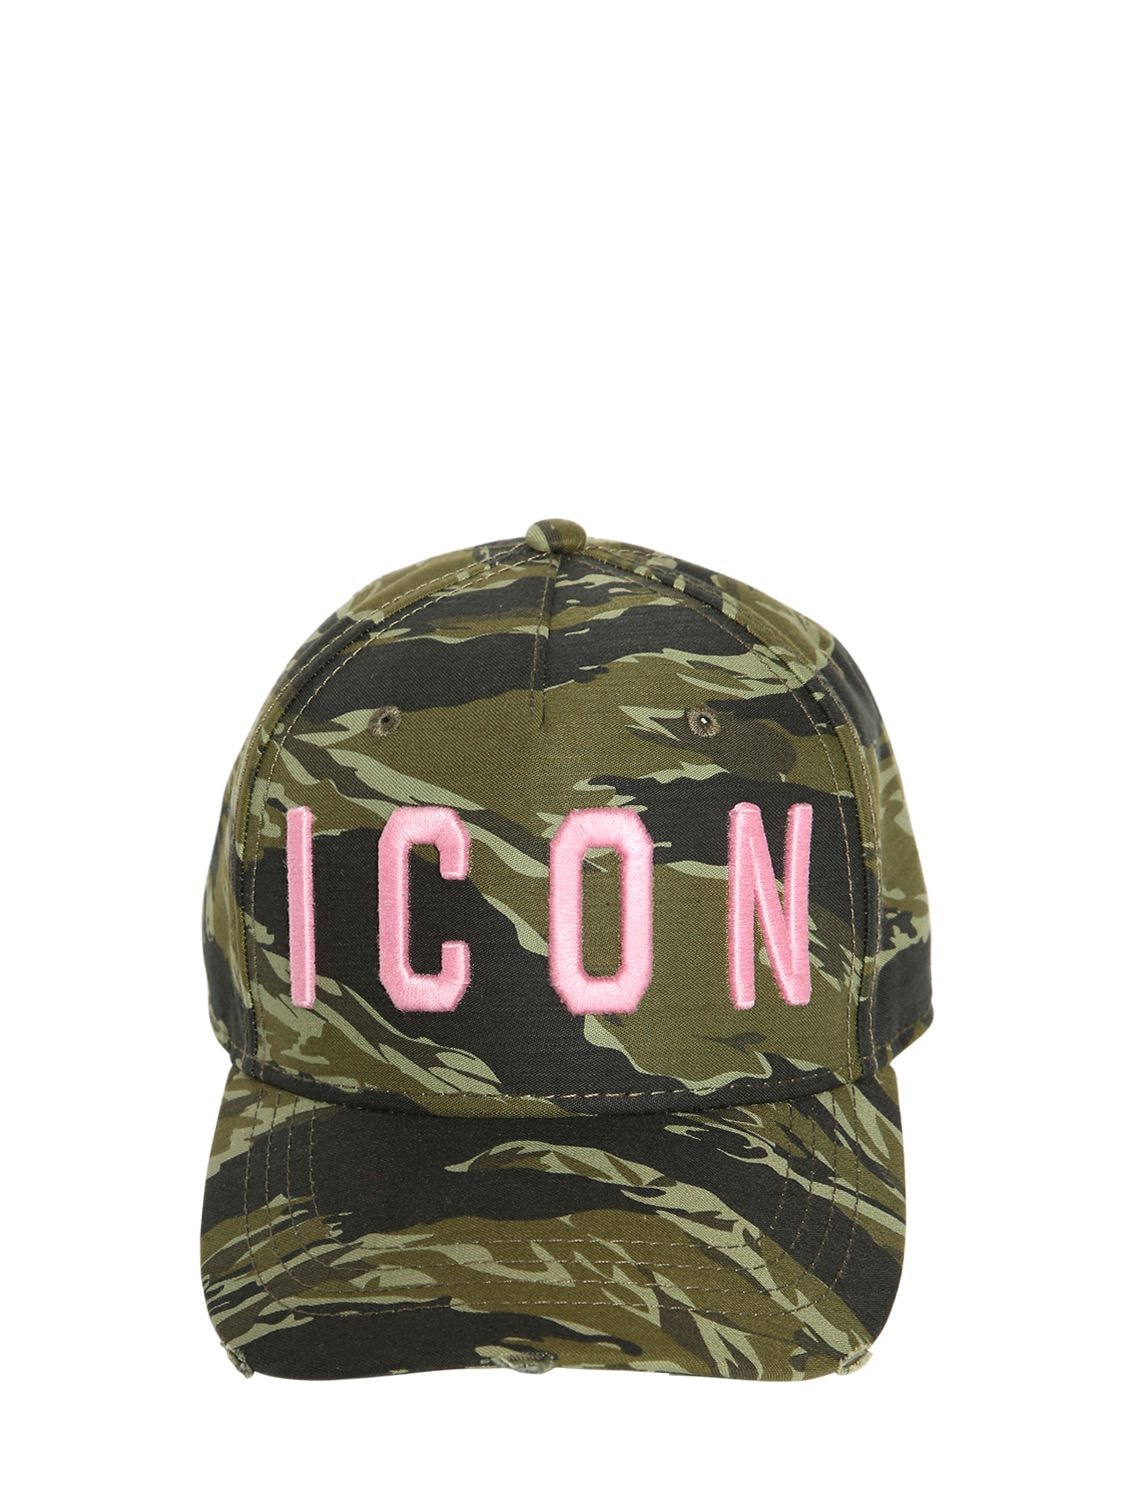 DSQUARED2 ICON MILITARY BASEBALL HAT,69IA0Y001-TTE1OTE1